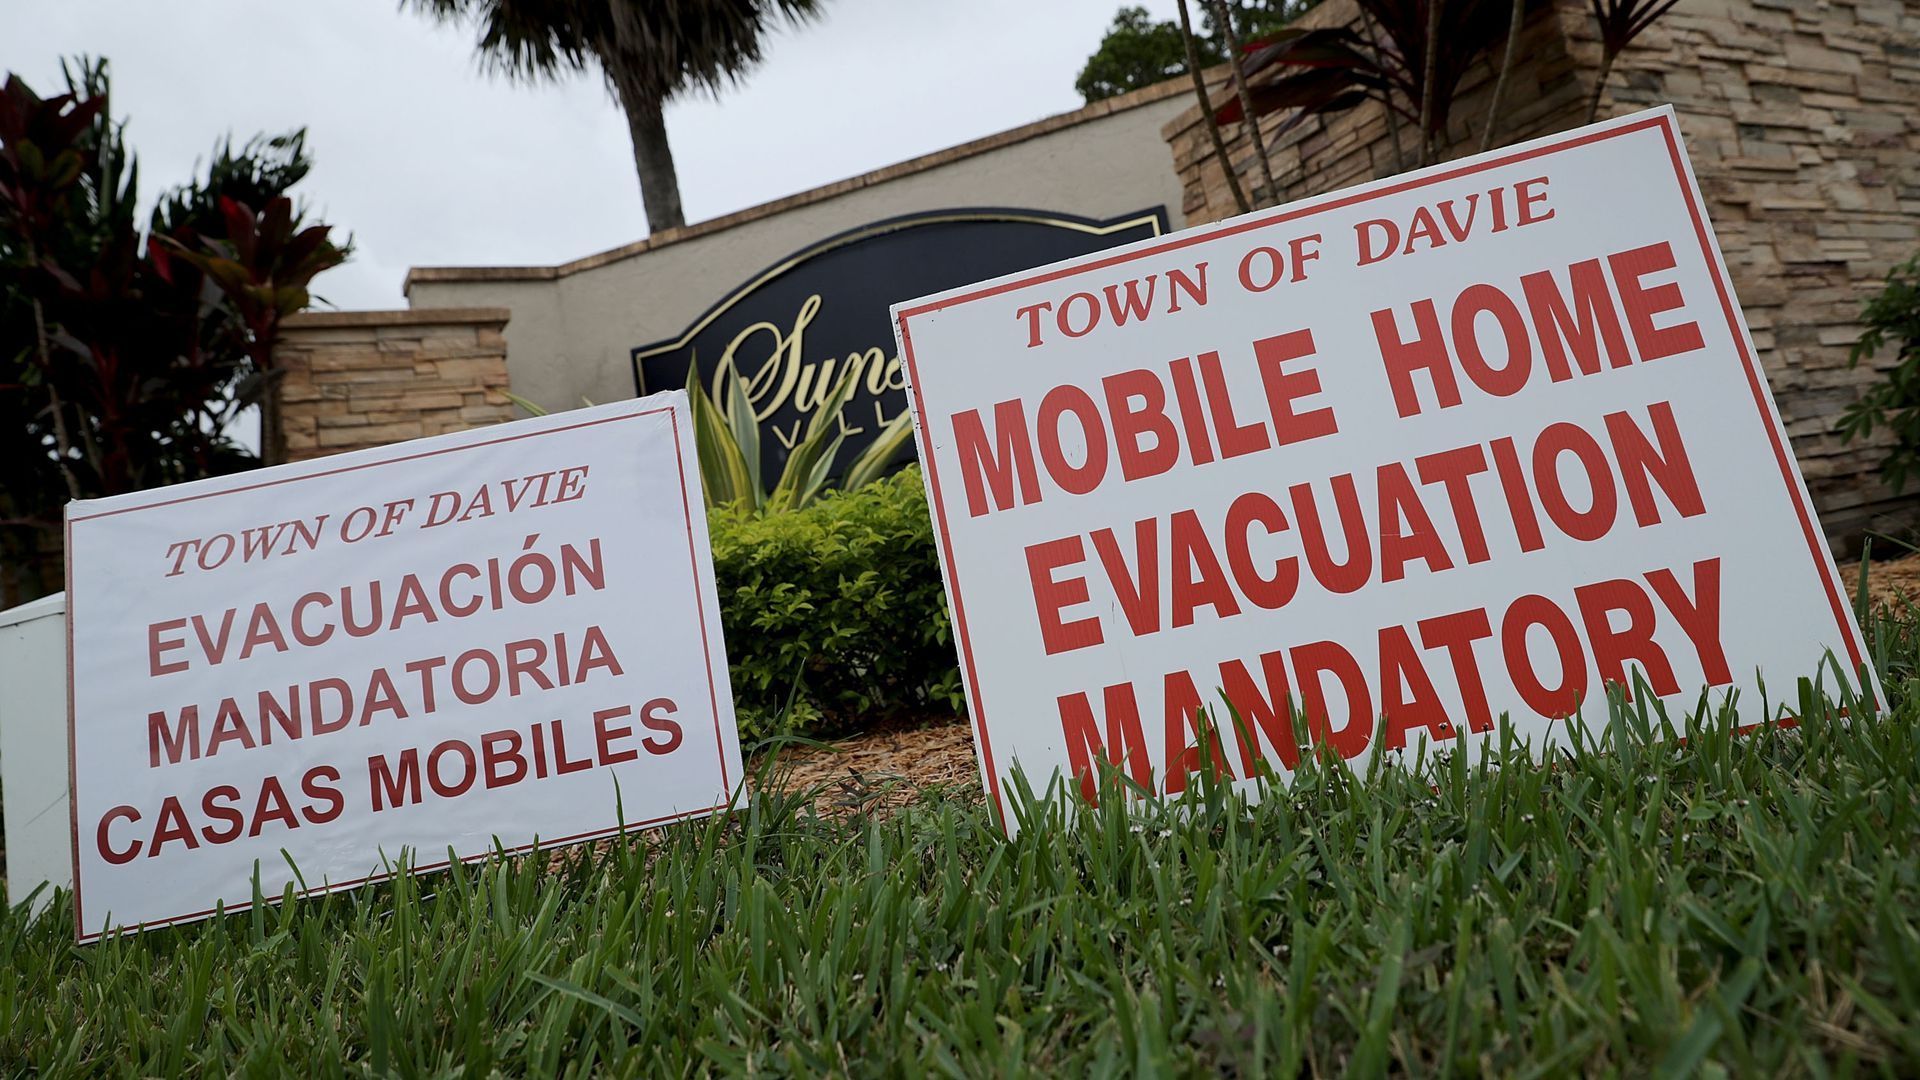 Signs about mandatory evacuations in Florida before Hurricane Irma struck in 2017.